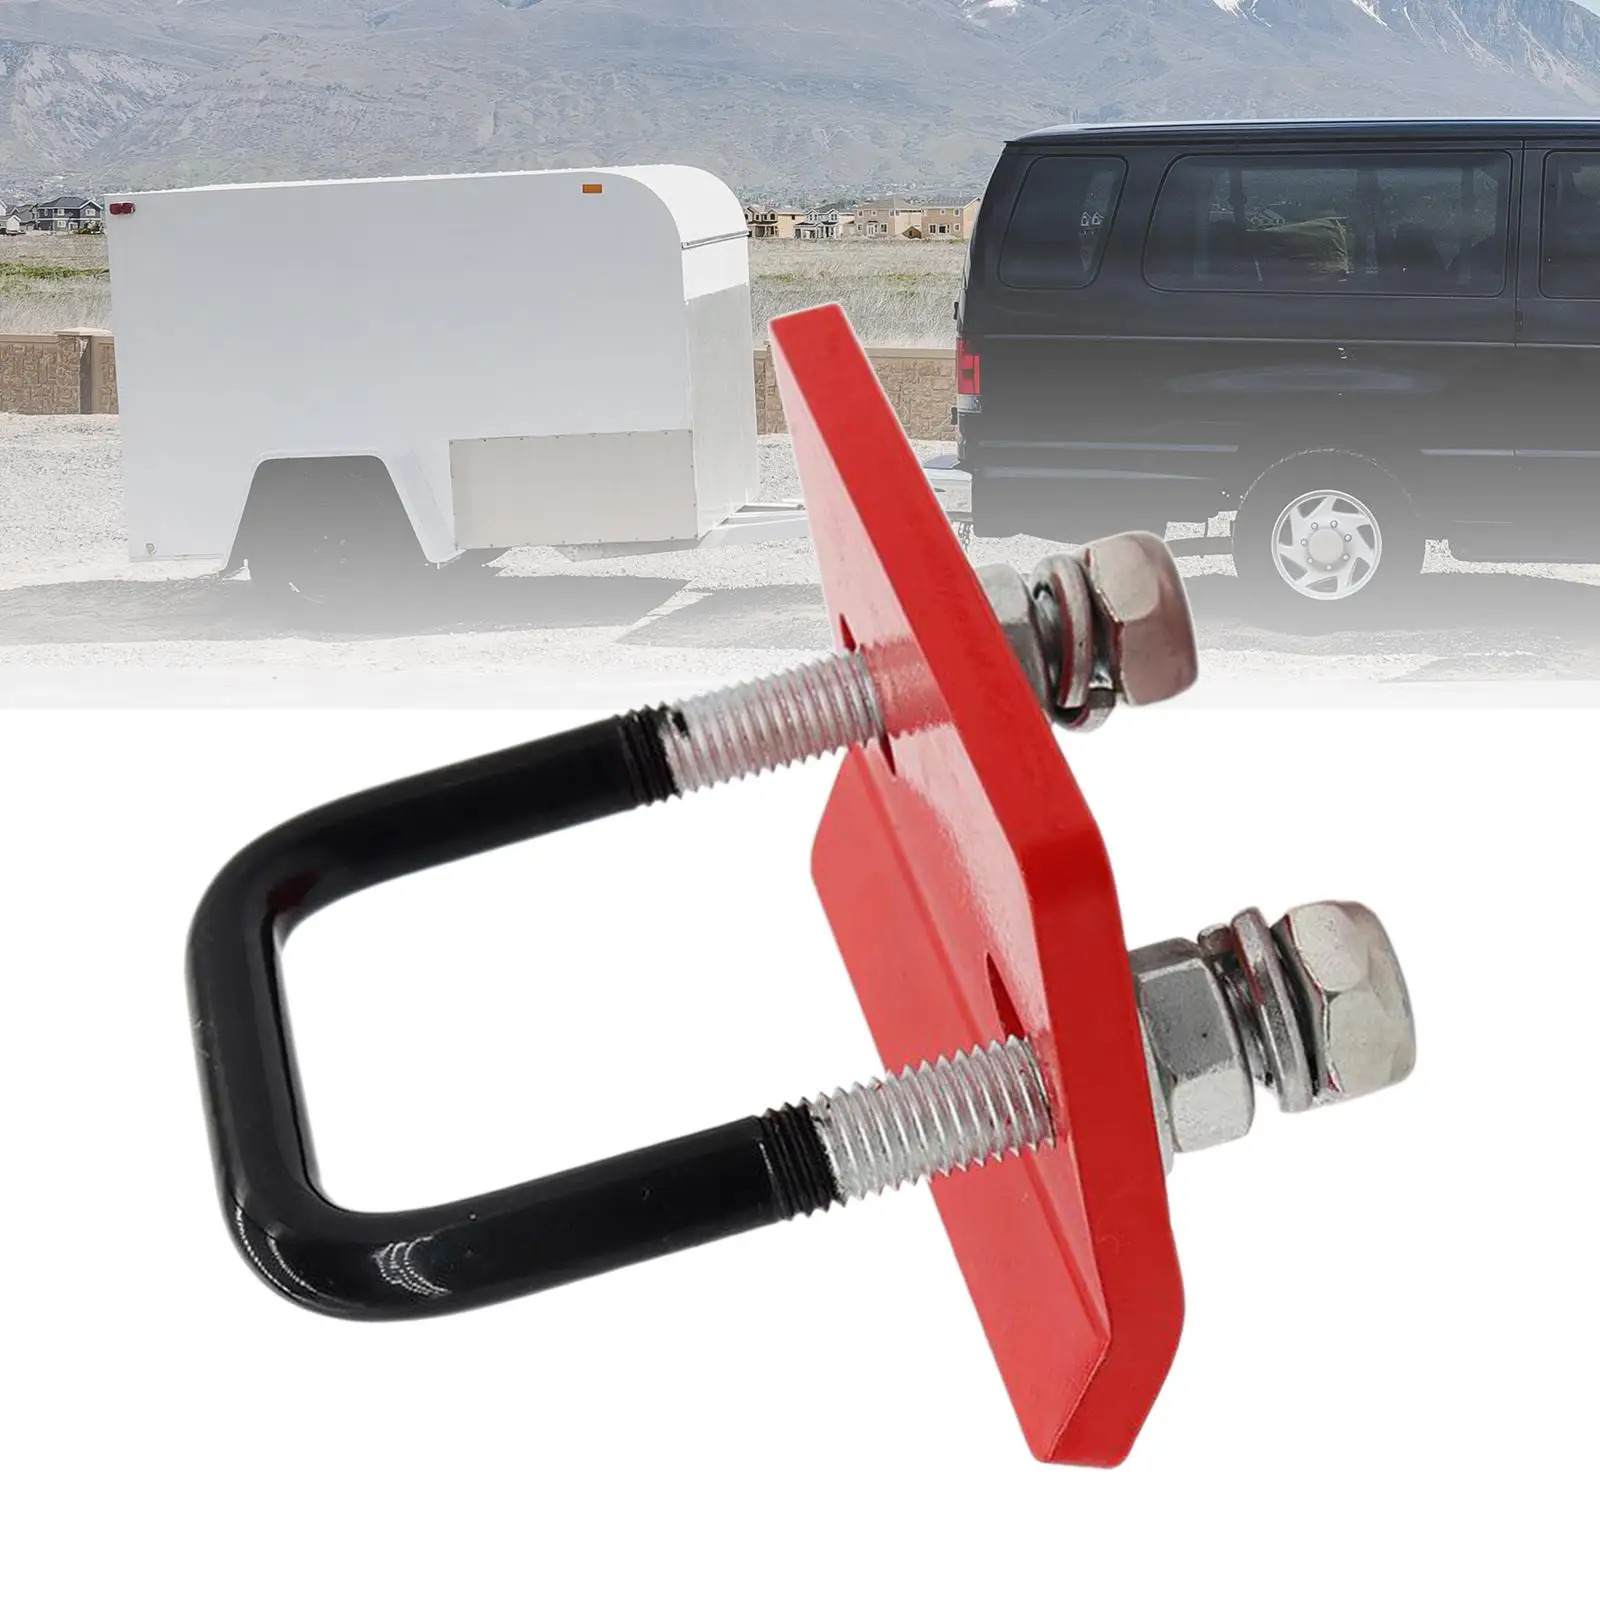 Hitch Tightener Trailer Hitches Clamp for Trailer Hitch Tray Bike Rack